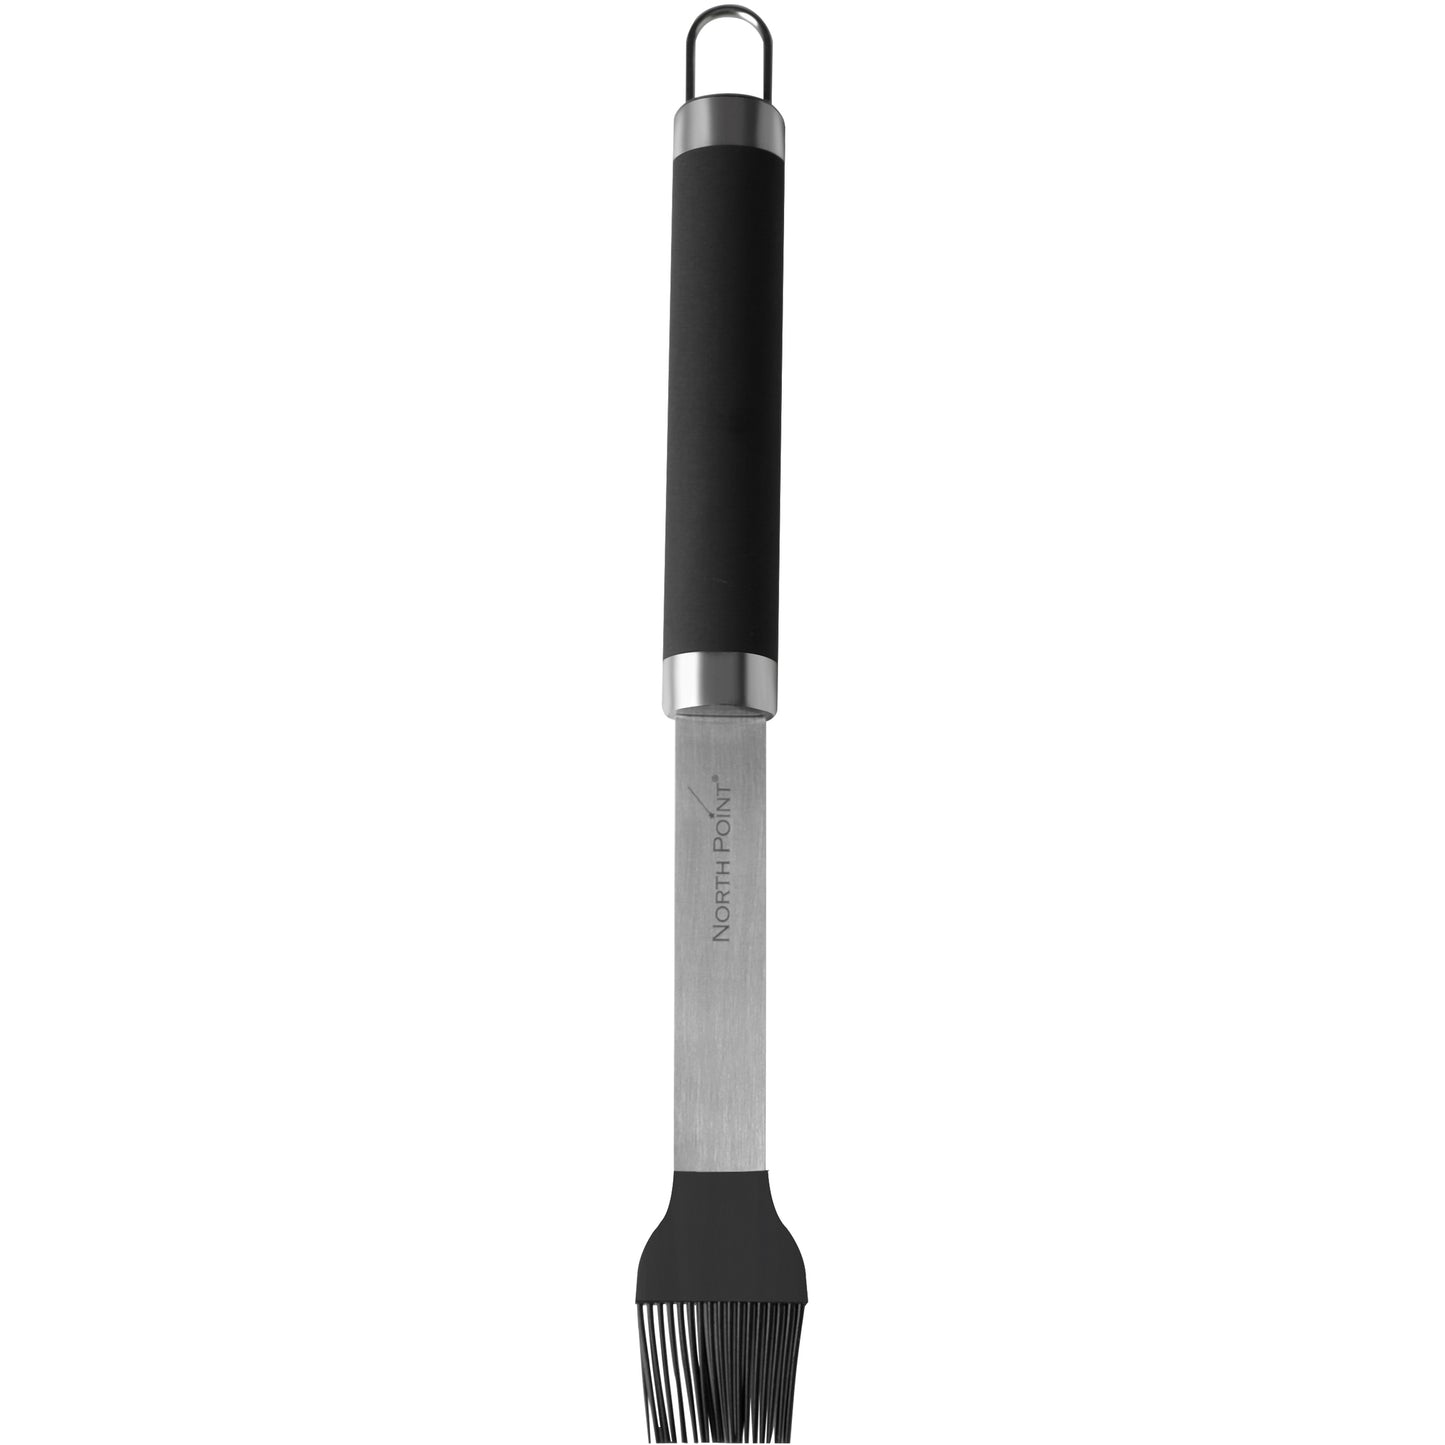 North Point® Basting Brush with a black handle